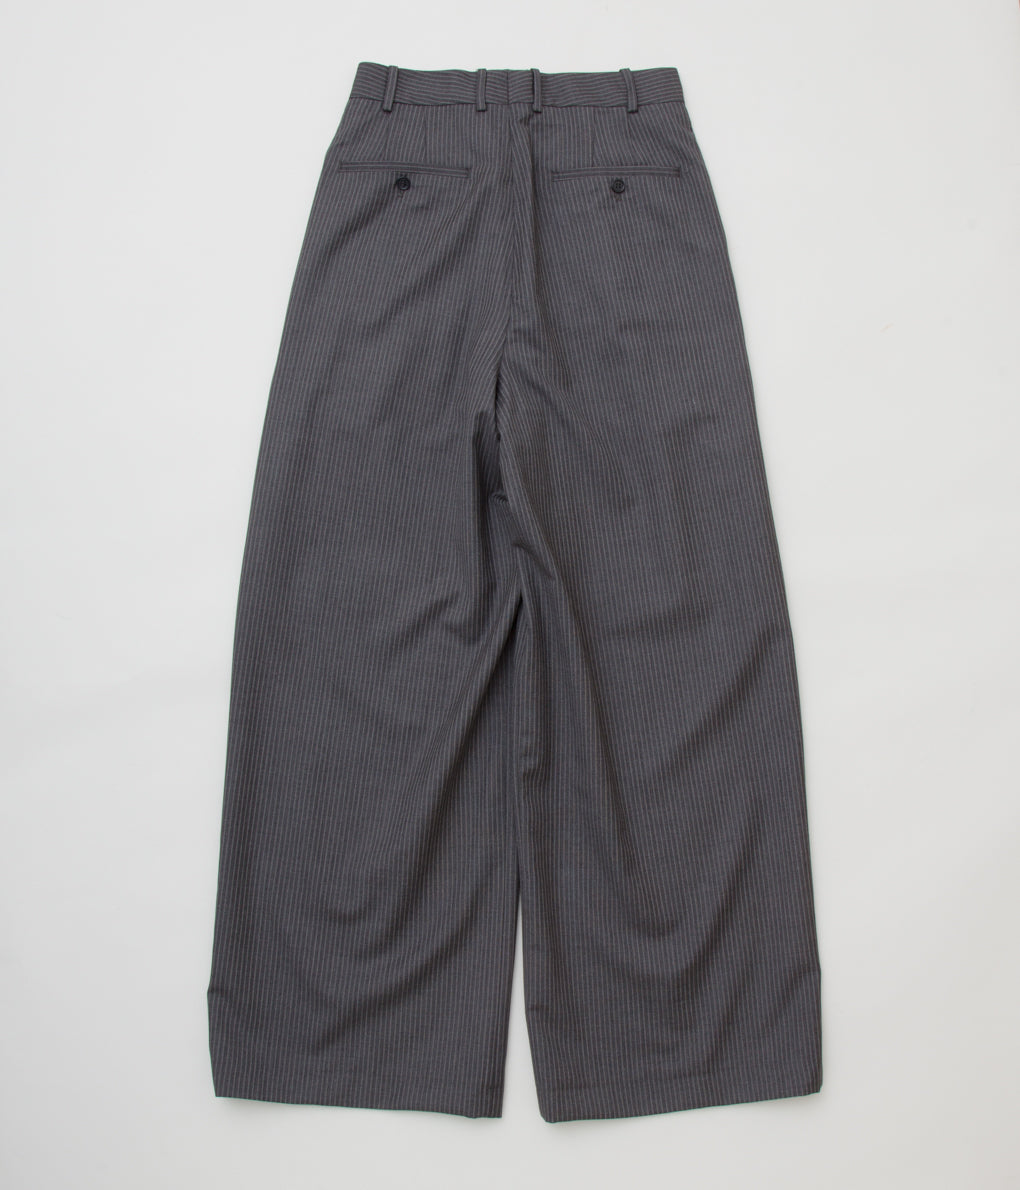 HED MAYNER "ELONGATED TROUSERS"(GREY CHALKSTRIPES)